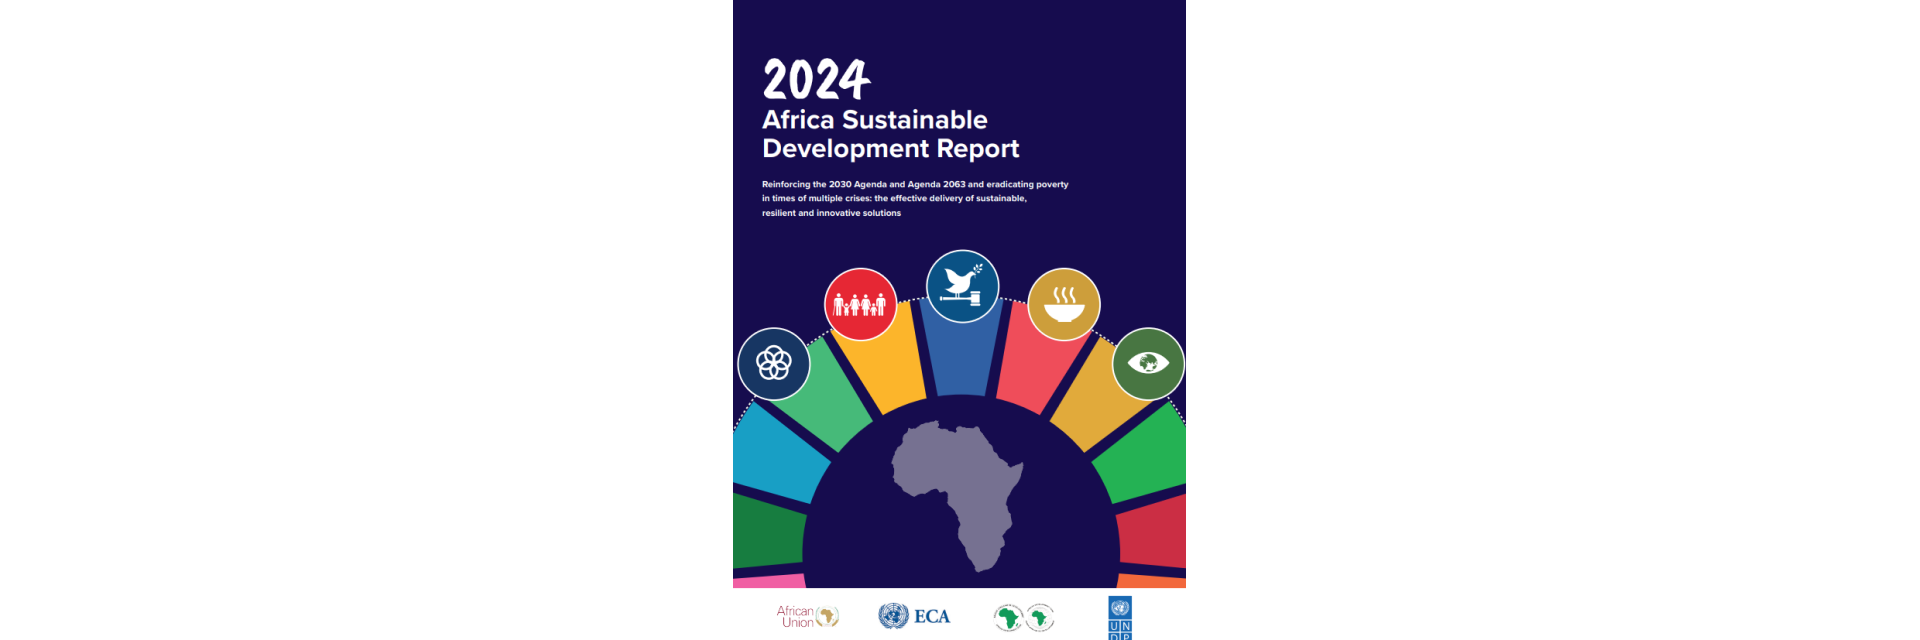 New Africa Sustainable Development Report Shows Critical Importance of Scaled-Up Development Financing